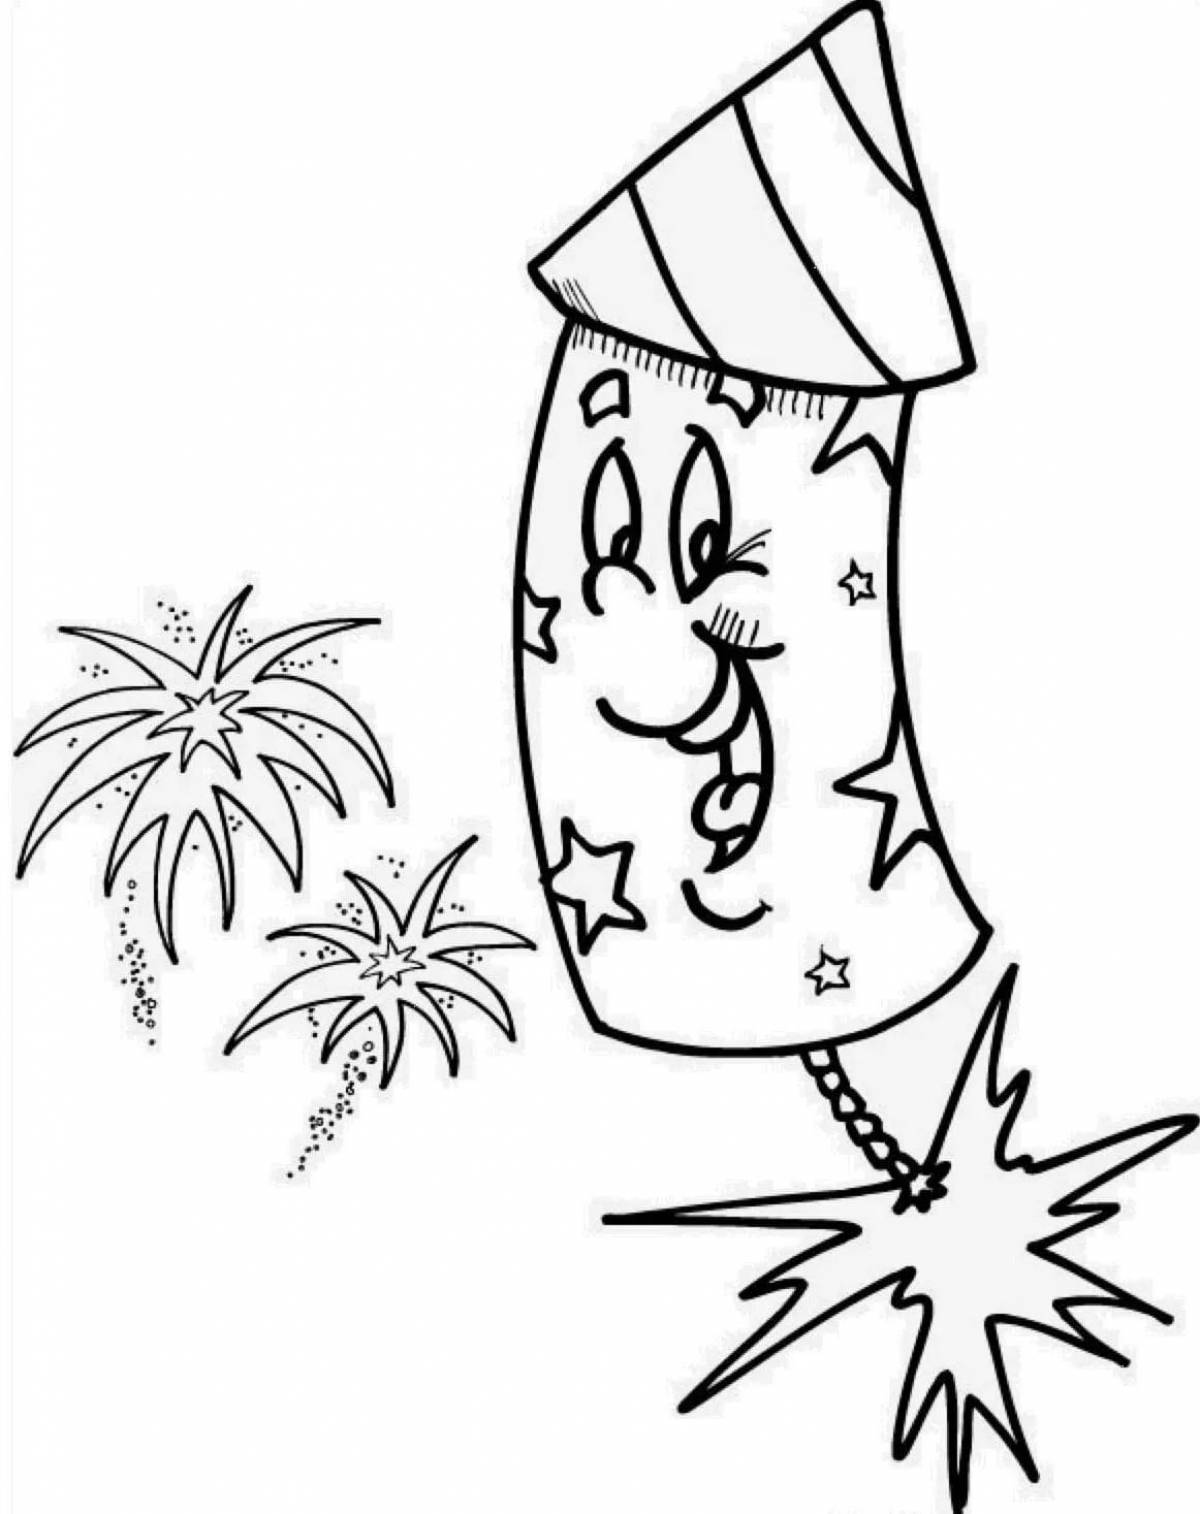 Sweet Christmas cracker coloring page